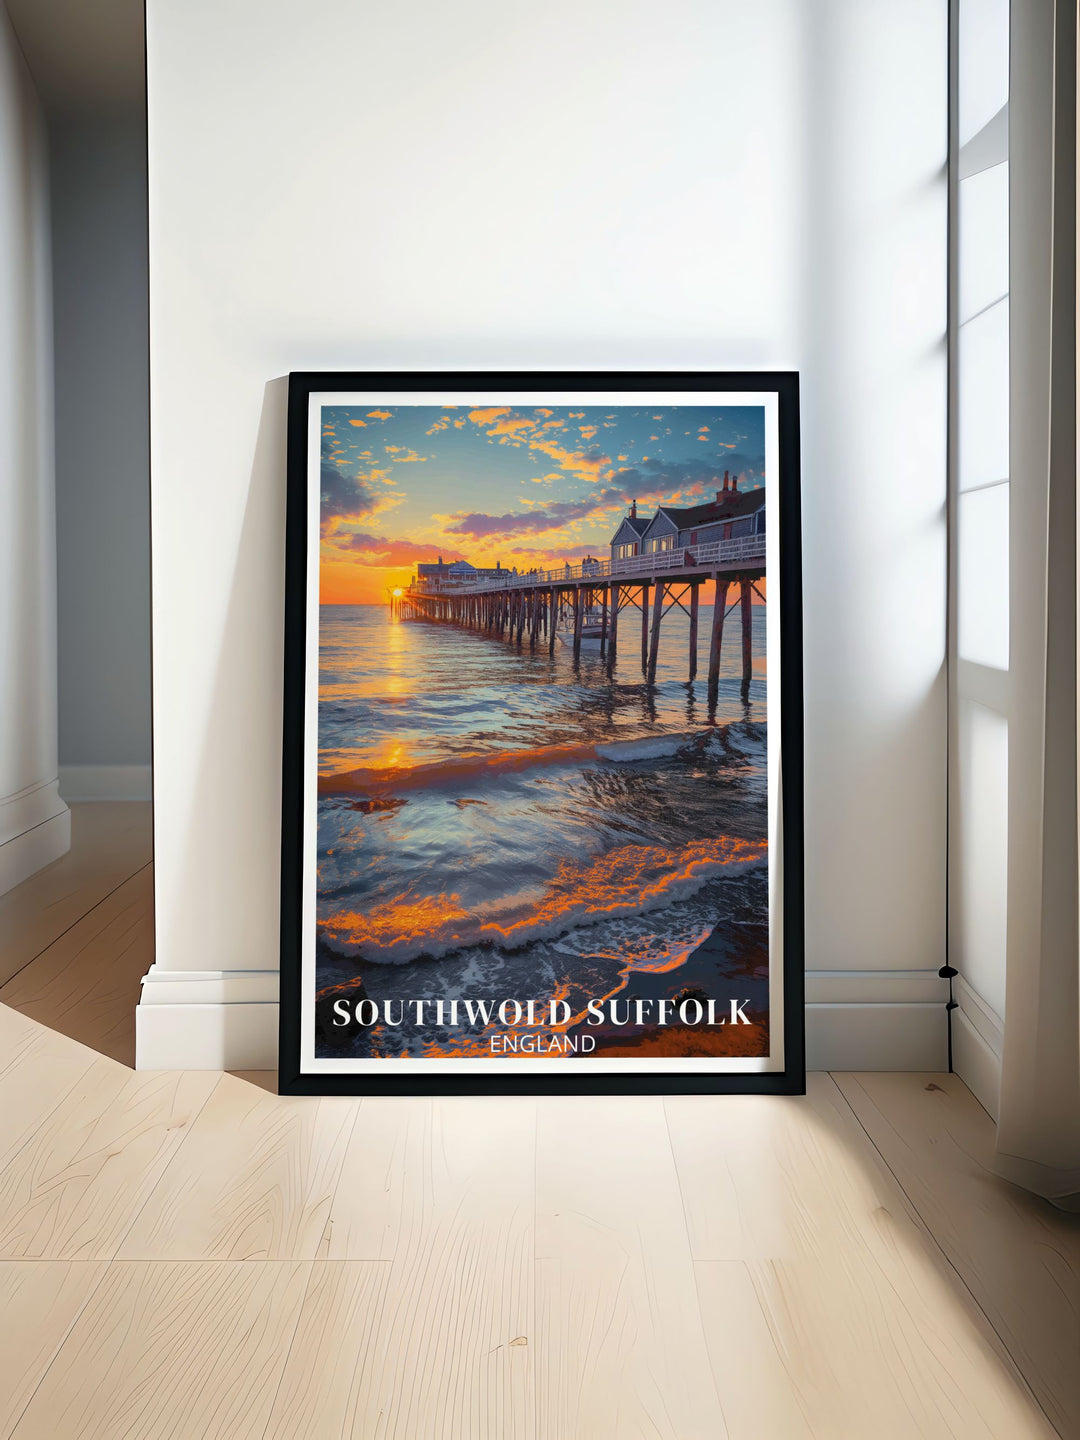 Southwold Poster featuring the iconic Southwold Lighthouse vibrant beach huts and picturesque Pier perfect for enhancing your home decor and bringing a touch of Suffolks coastal charm to any room ideal for UK travel enthusiasts and seaside art lovers